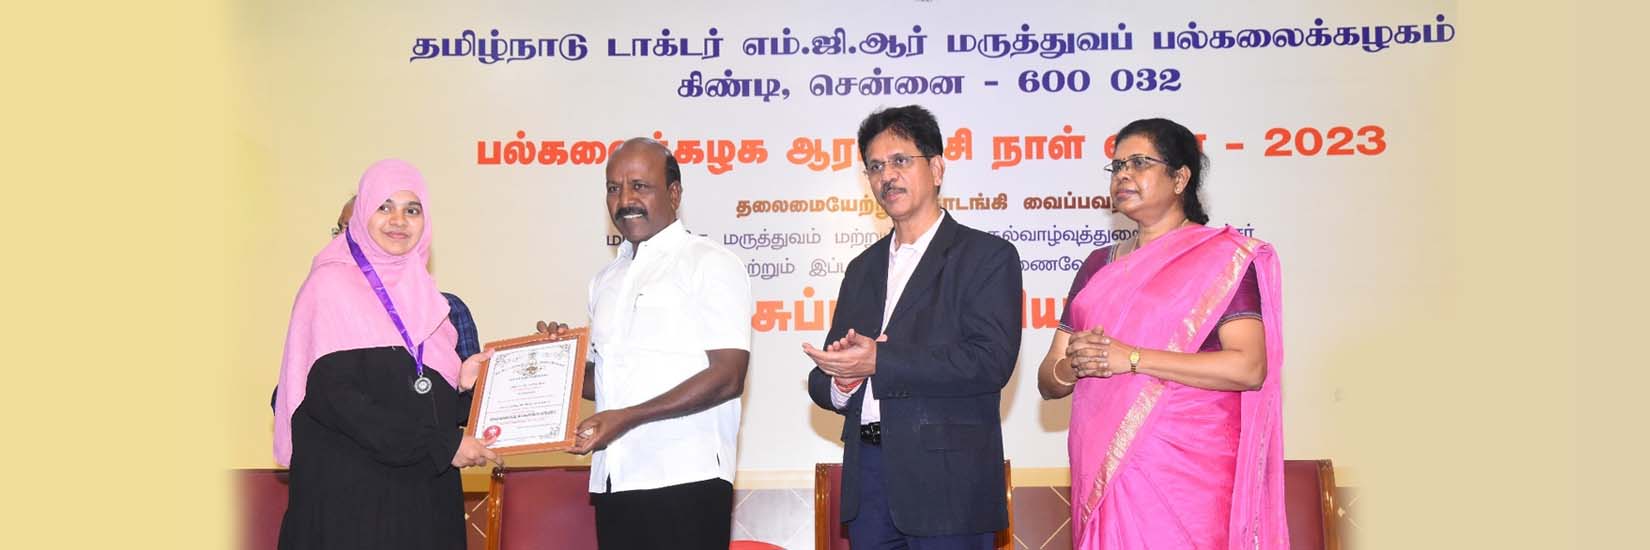 Dr.Aayesha Niloufar, our PG from Dept of Oral and Maxillofacial Pathology and Oral Microbiology, receiving the University Gold Medal for 2023 from Honourable Health Minister of TN, Thiru.Ma.Subramanian in the presence of Vice-Chancellor Dr. K. Narayanasamy